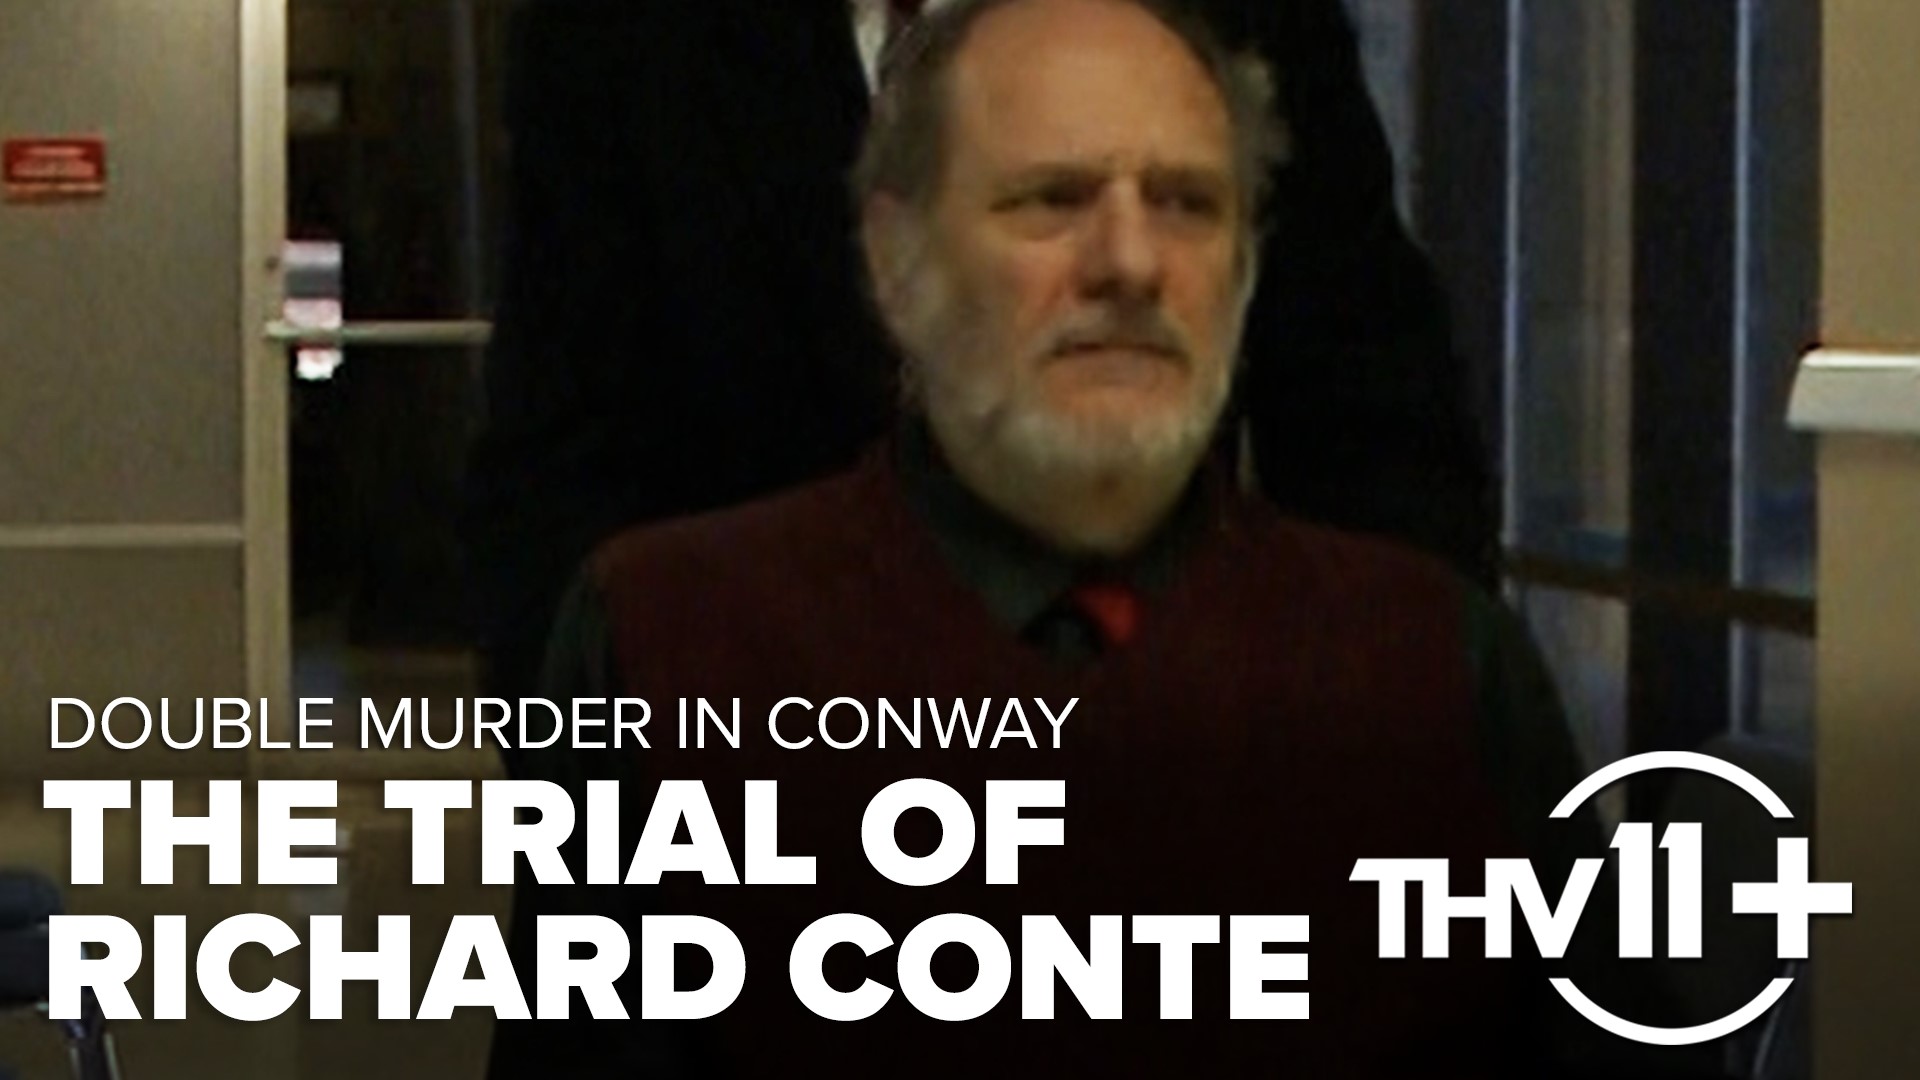 In 2013, Richard Conte was found guilty over a decade after murdering two men, Carter Elliot and Timmy Wayne Robertson, at a Conway home in 2002.